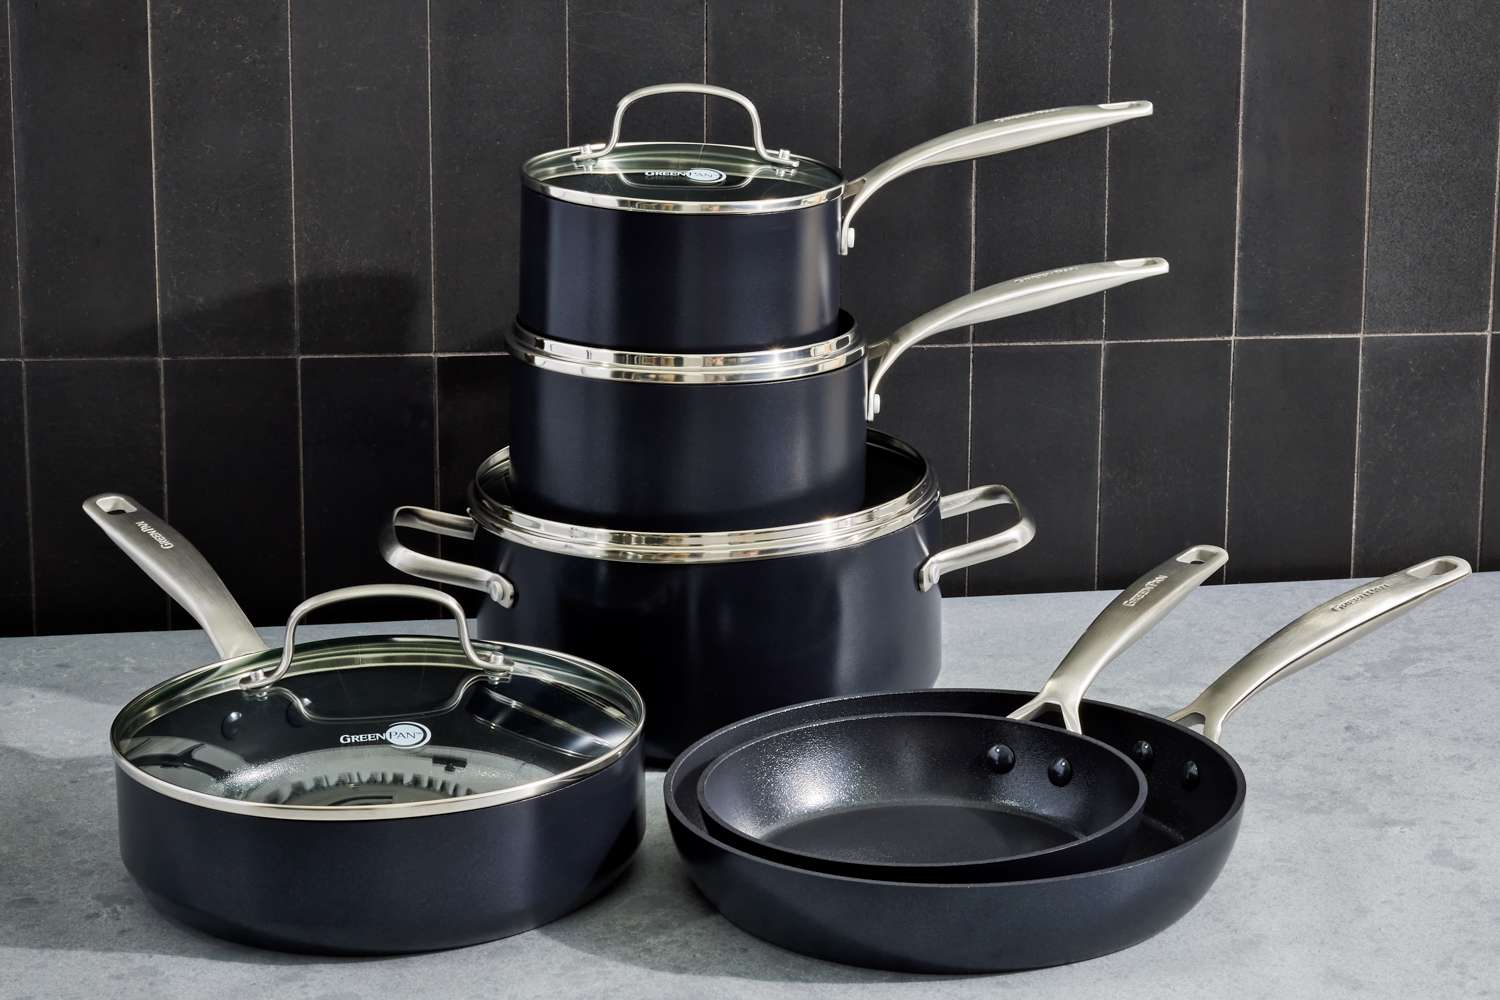 A Set Of Black Cooking Wears